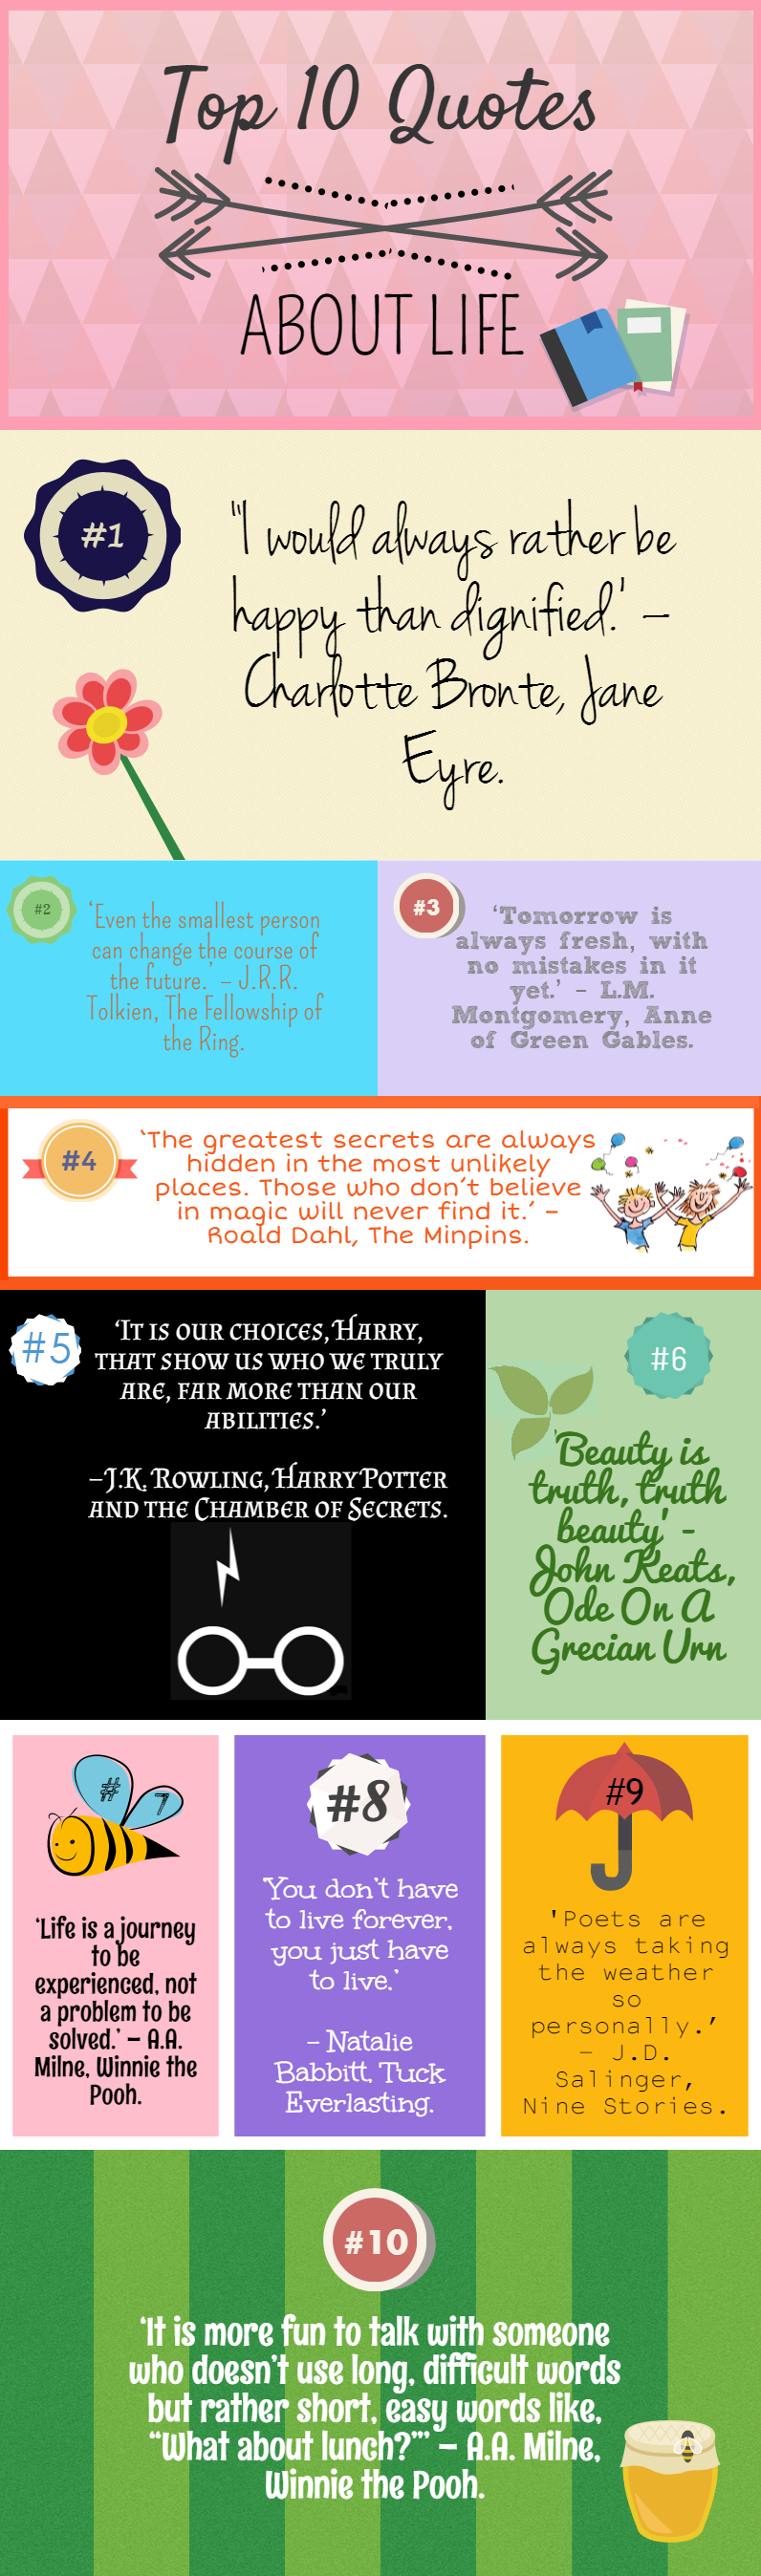 Top 10 Life Quotes Infographic